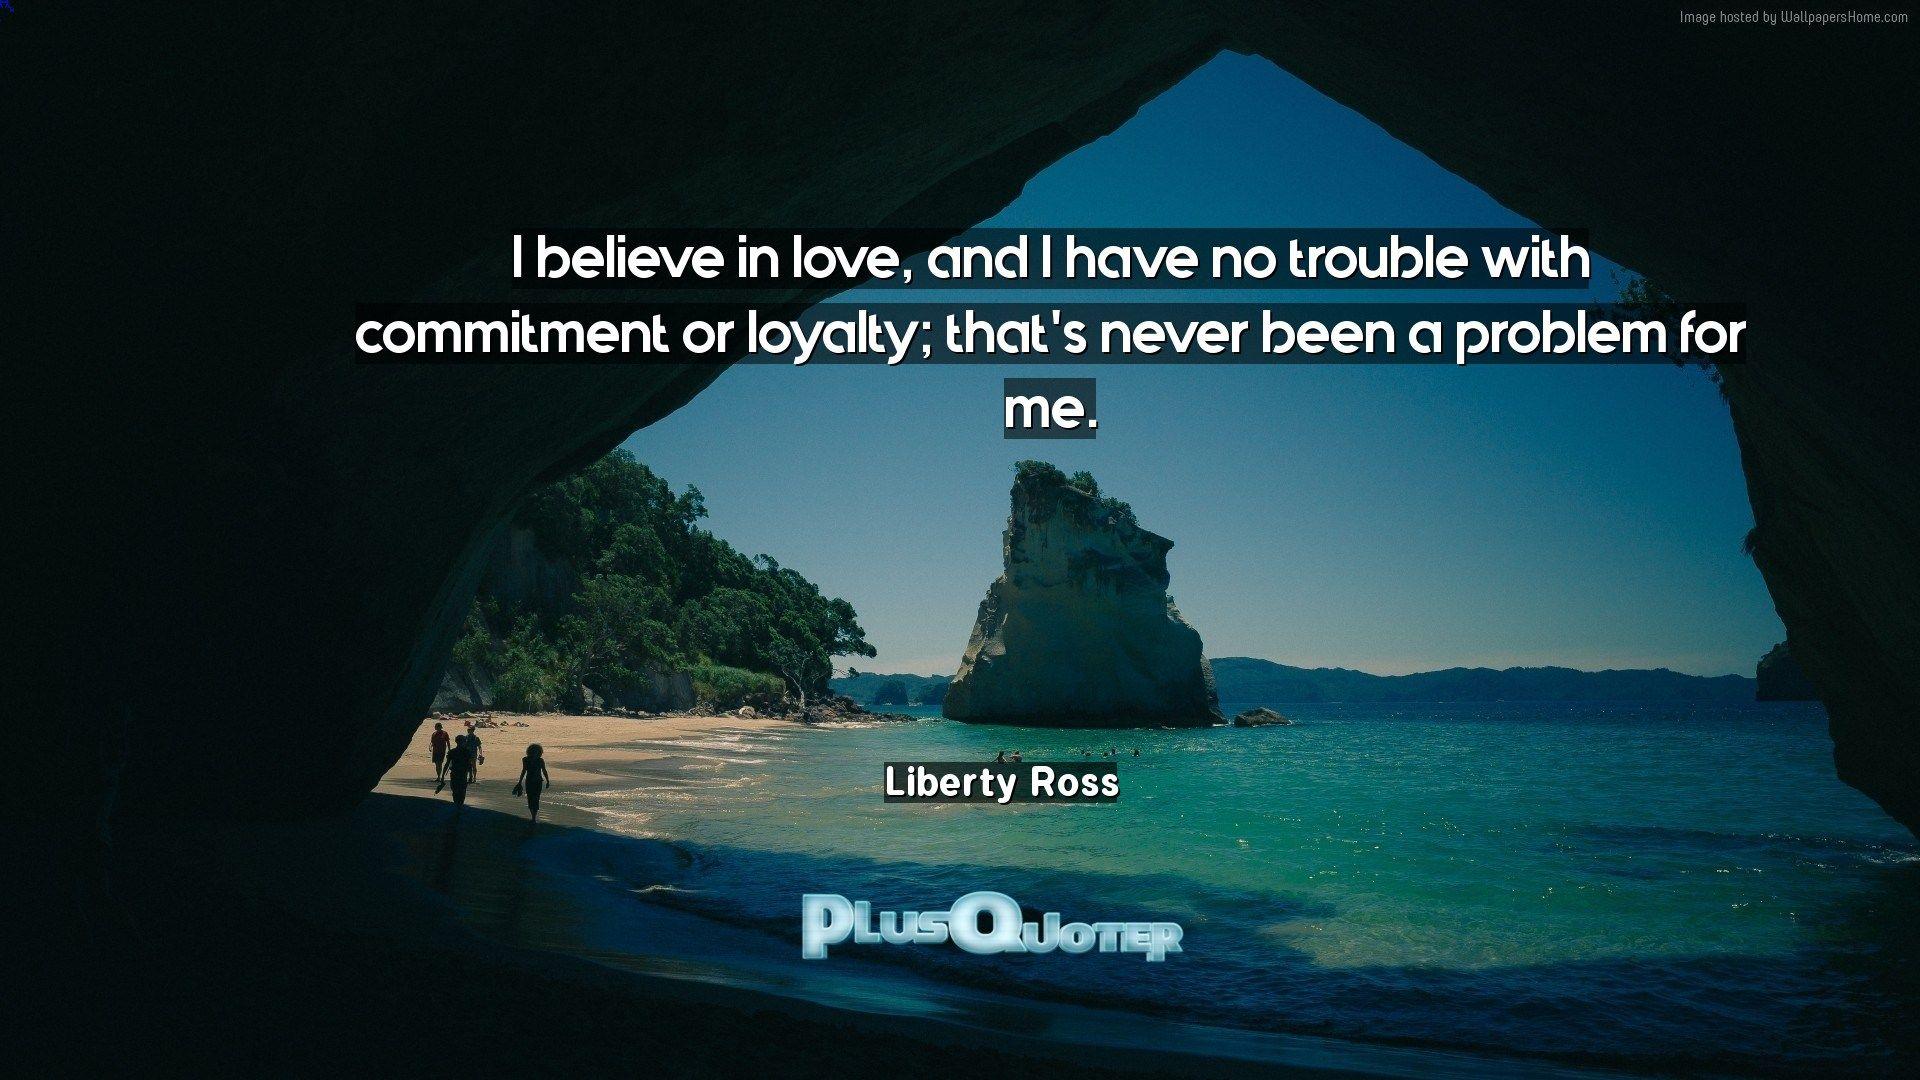 I believe in love, and I have no trouble with commitment or loyalty